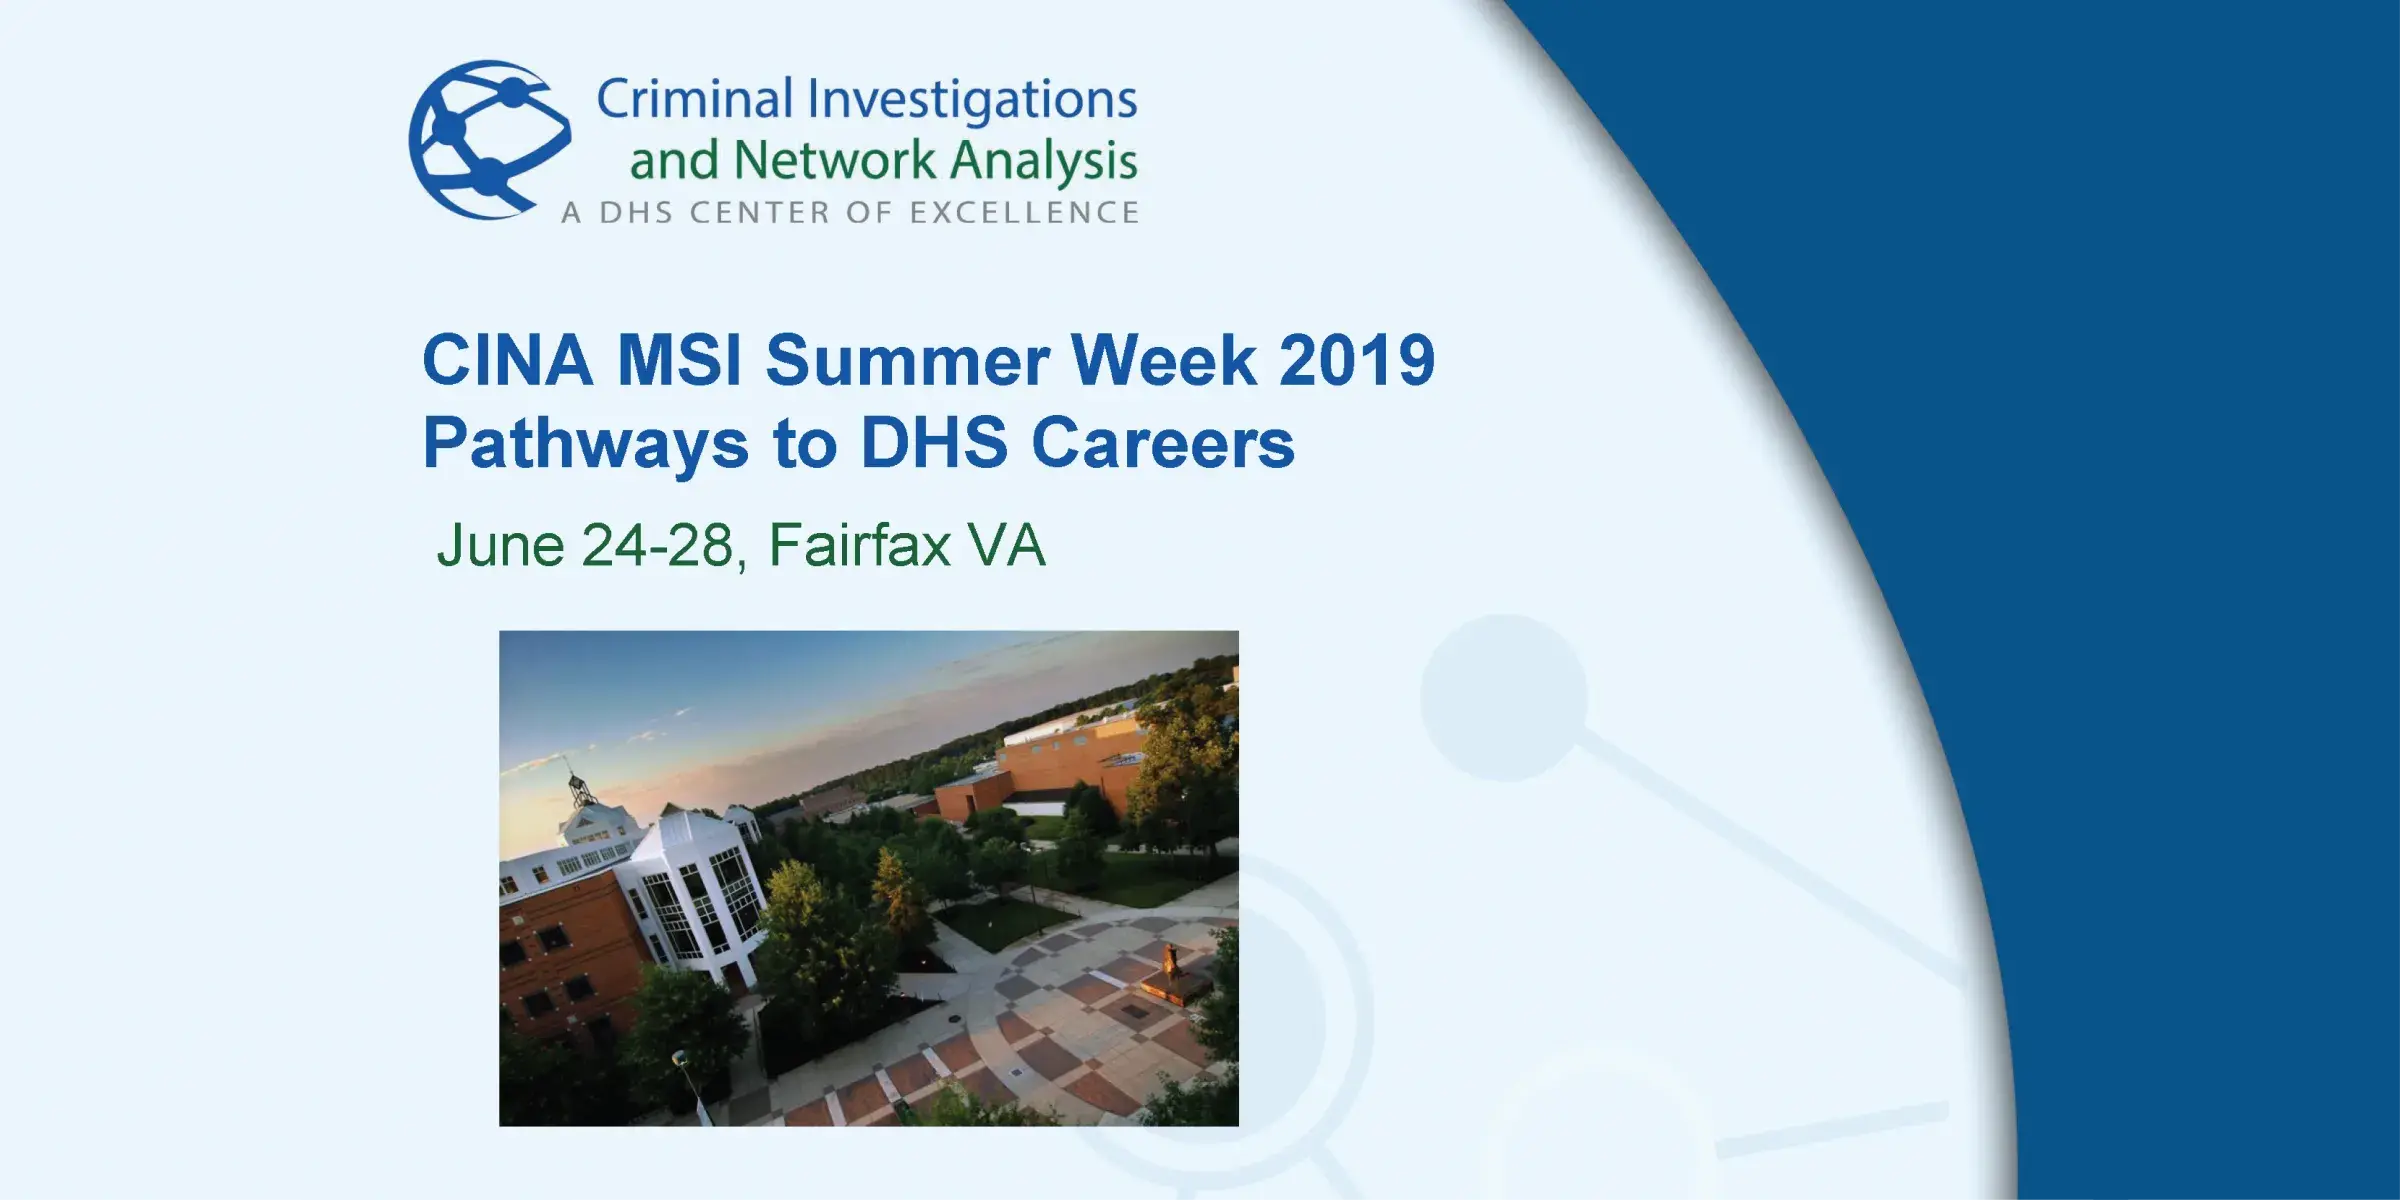 Criminal Investigations and Network Analysis. A DHS Center of Excellence. CINA MSI Summer Week 2019. Pathways to DHS Careers. June 24-28, Fairfax, Va. Graphic of university quad.